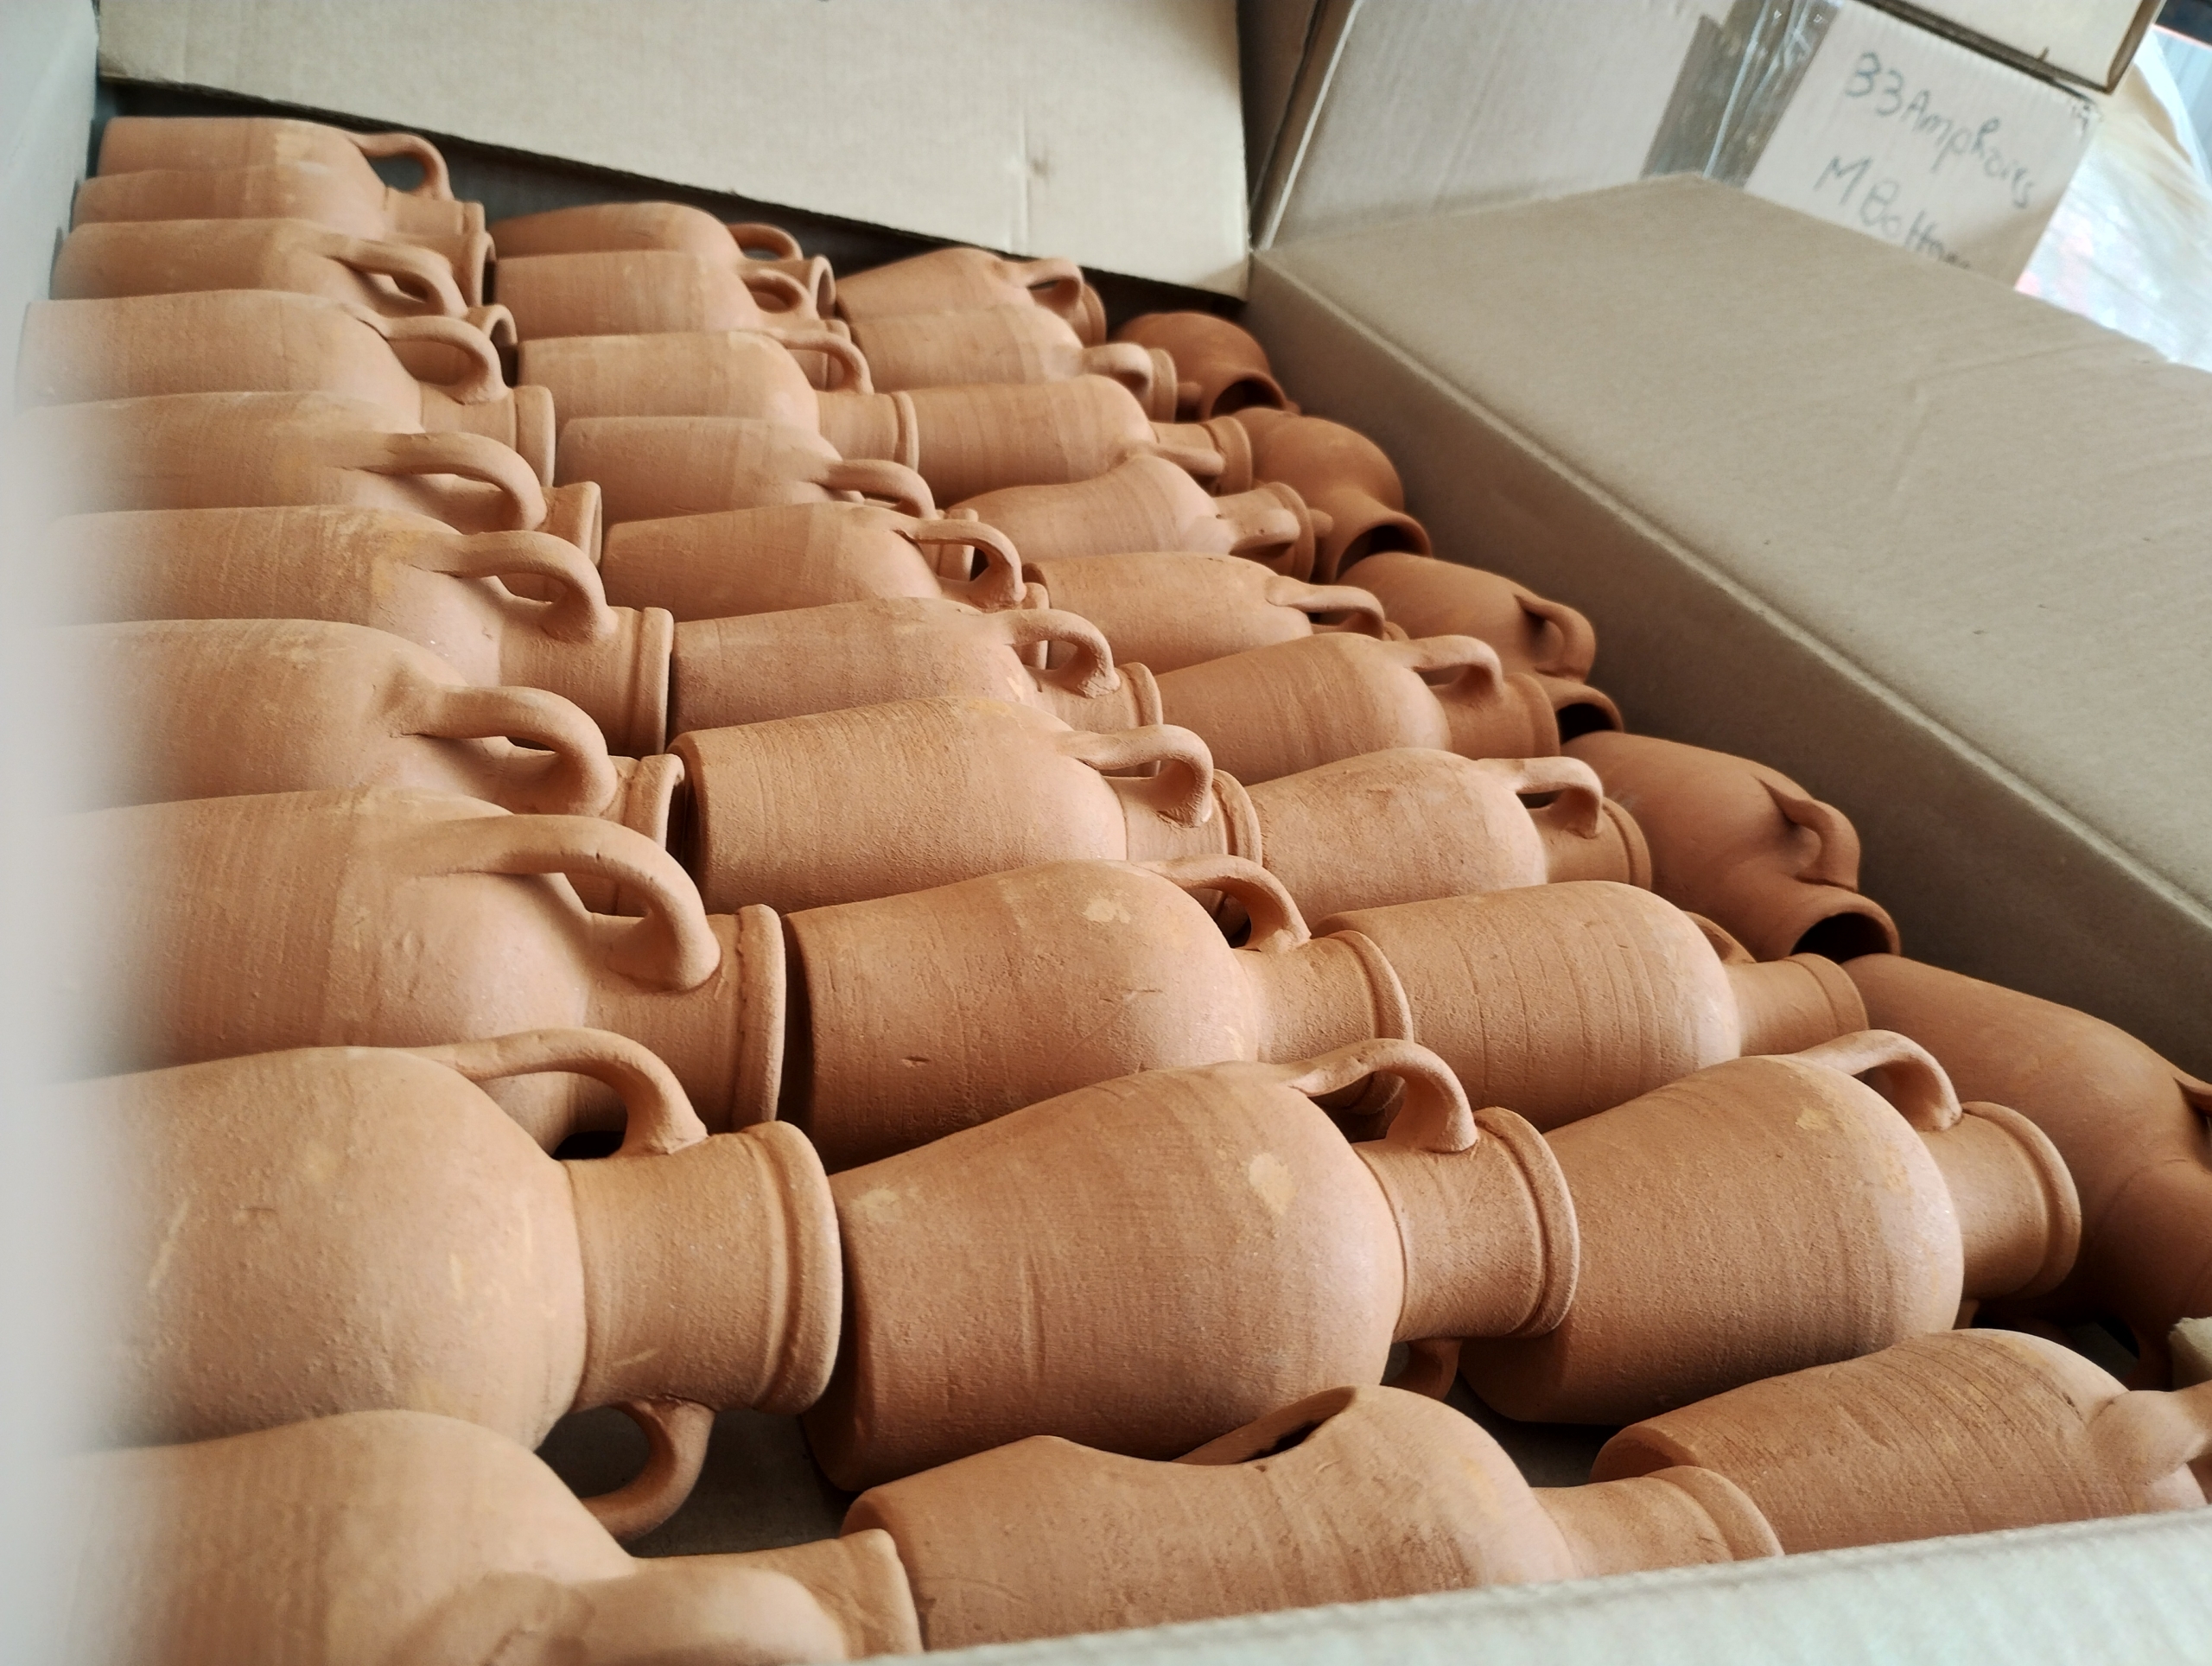 Photo of a box of terracotta amphorae suitable for plants or an aquarium